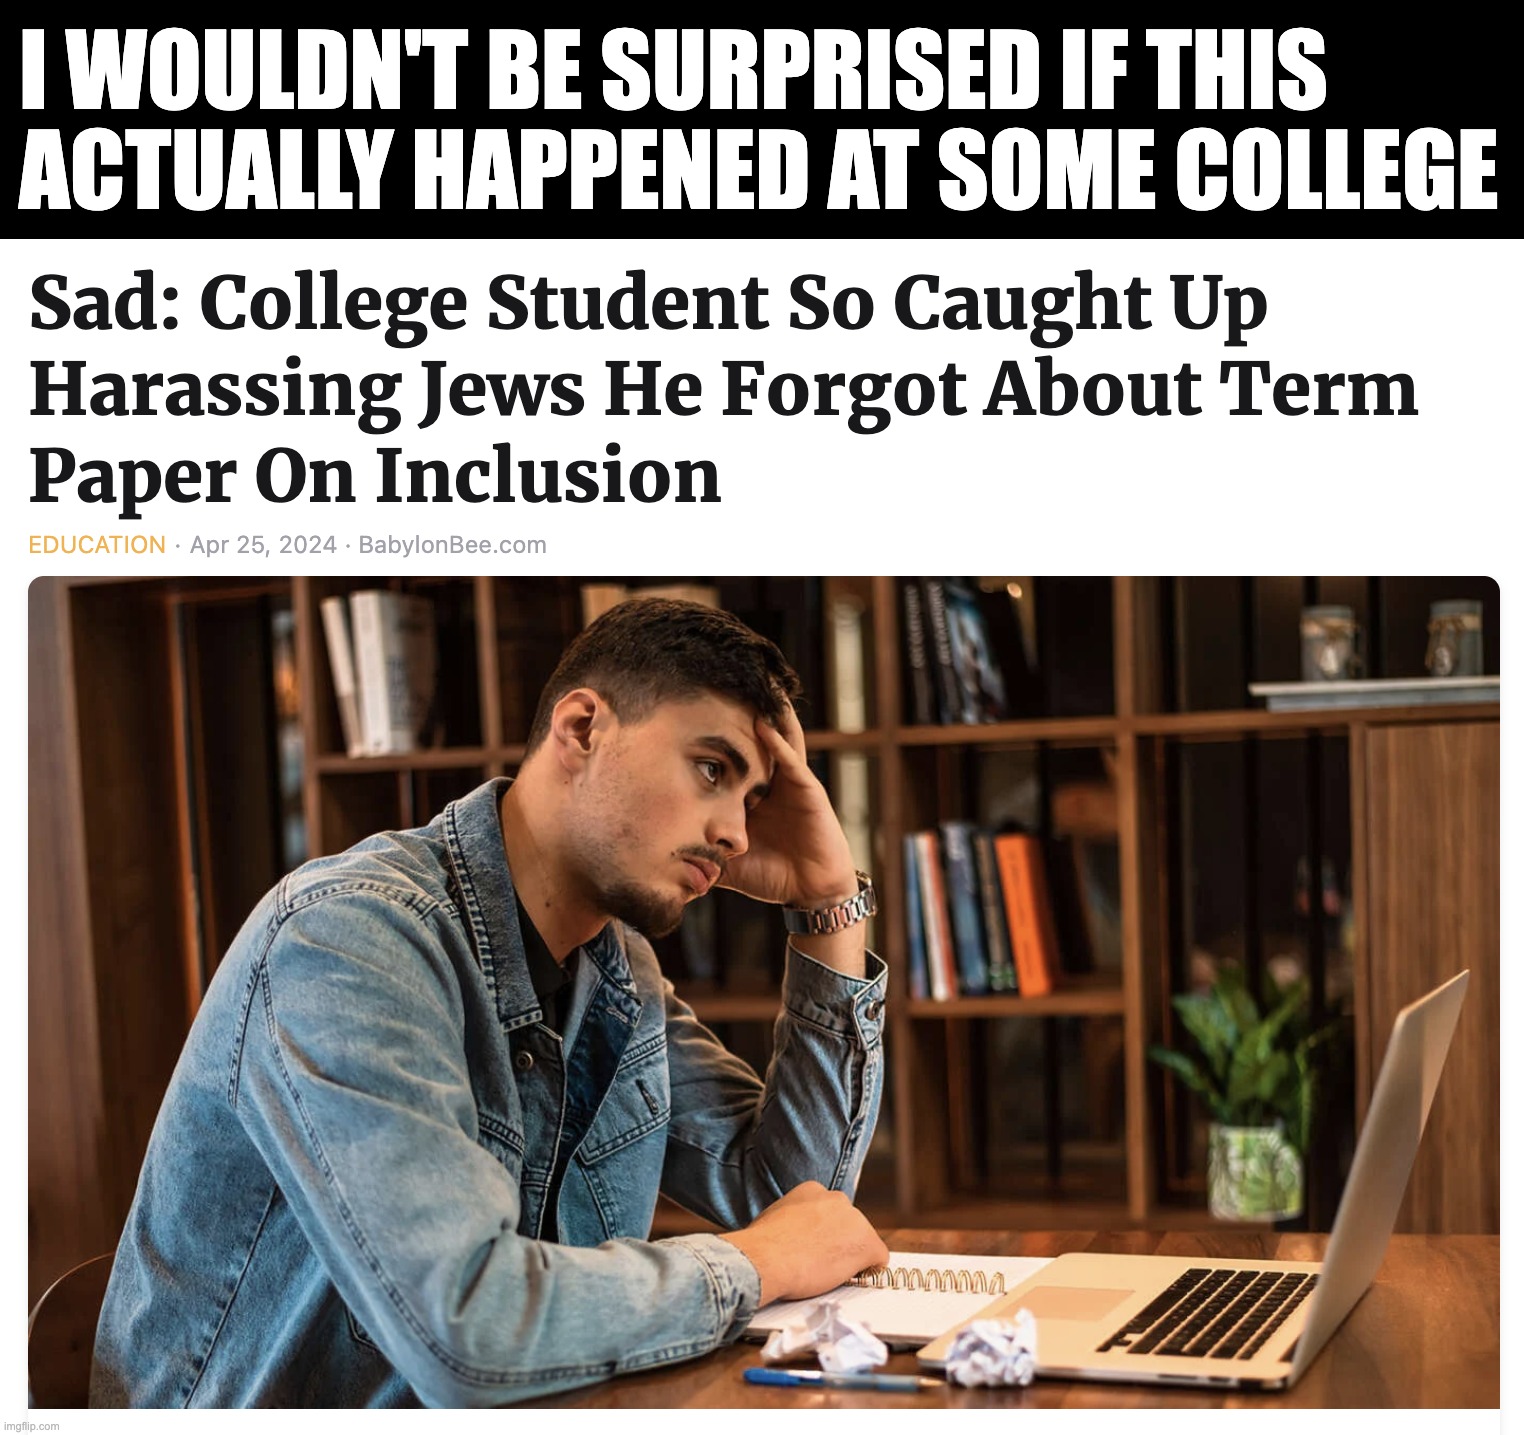 I WOULDN'T BE SURPRISED IF THIS
ACTUALLY HAPPENED AT SOME COLLEGE | made w/ Imgflip meme maker